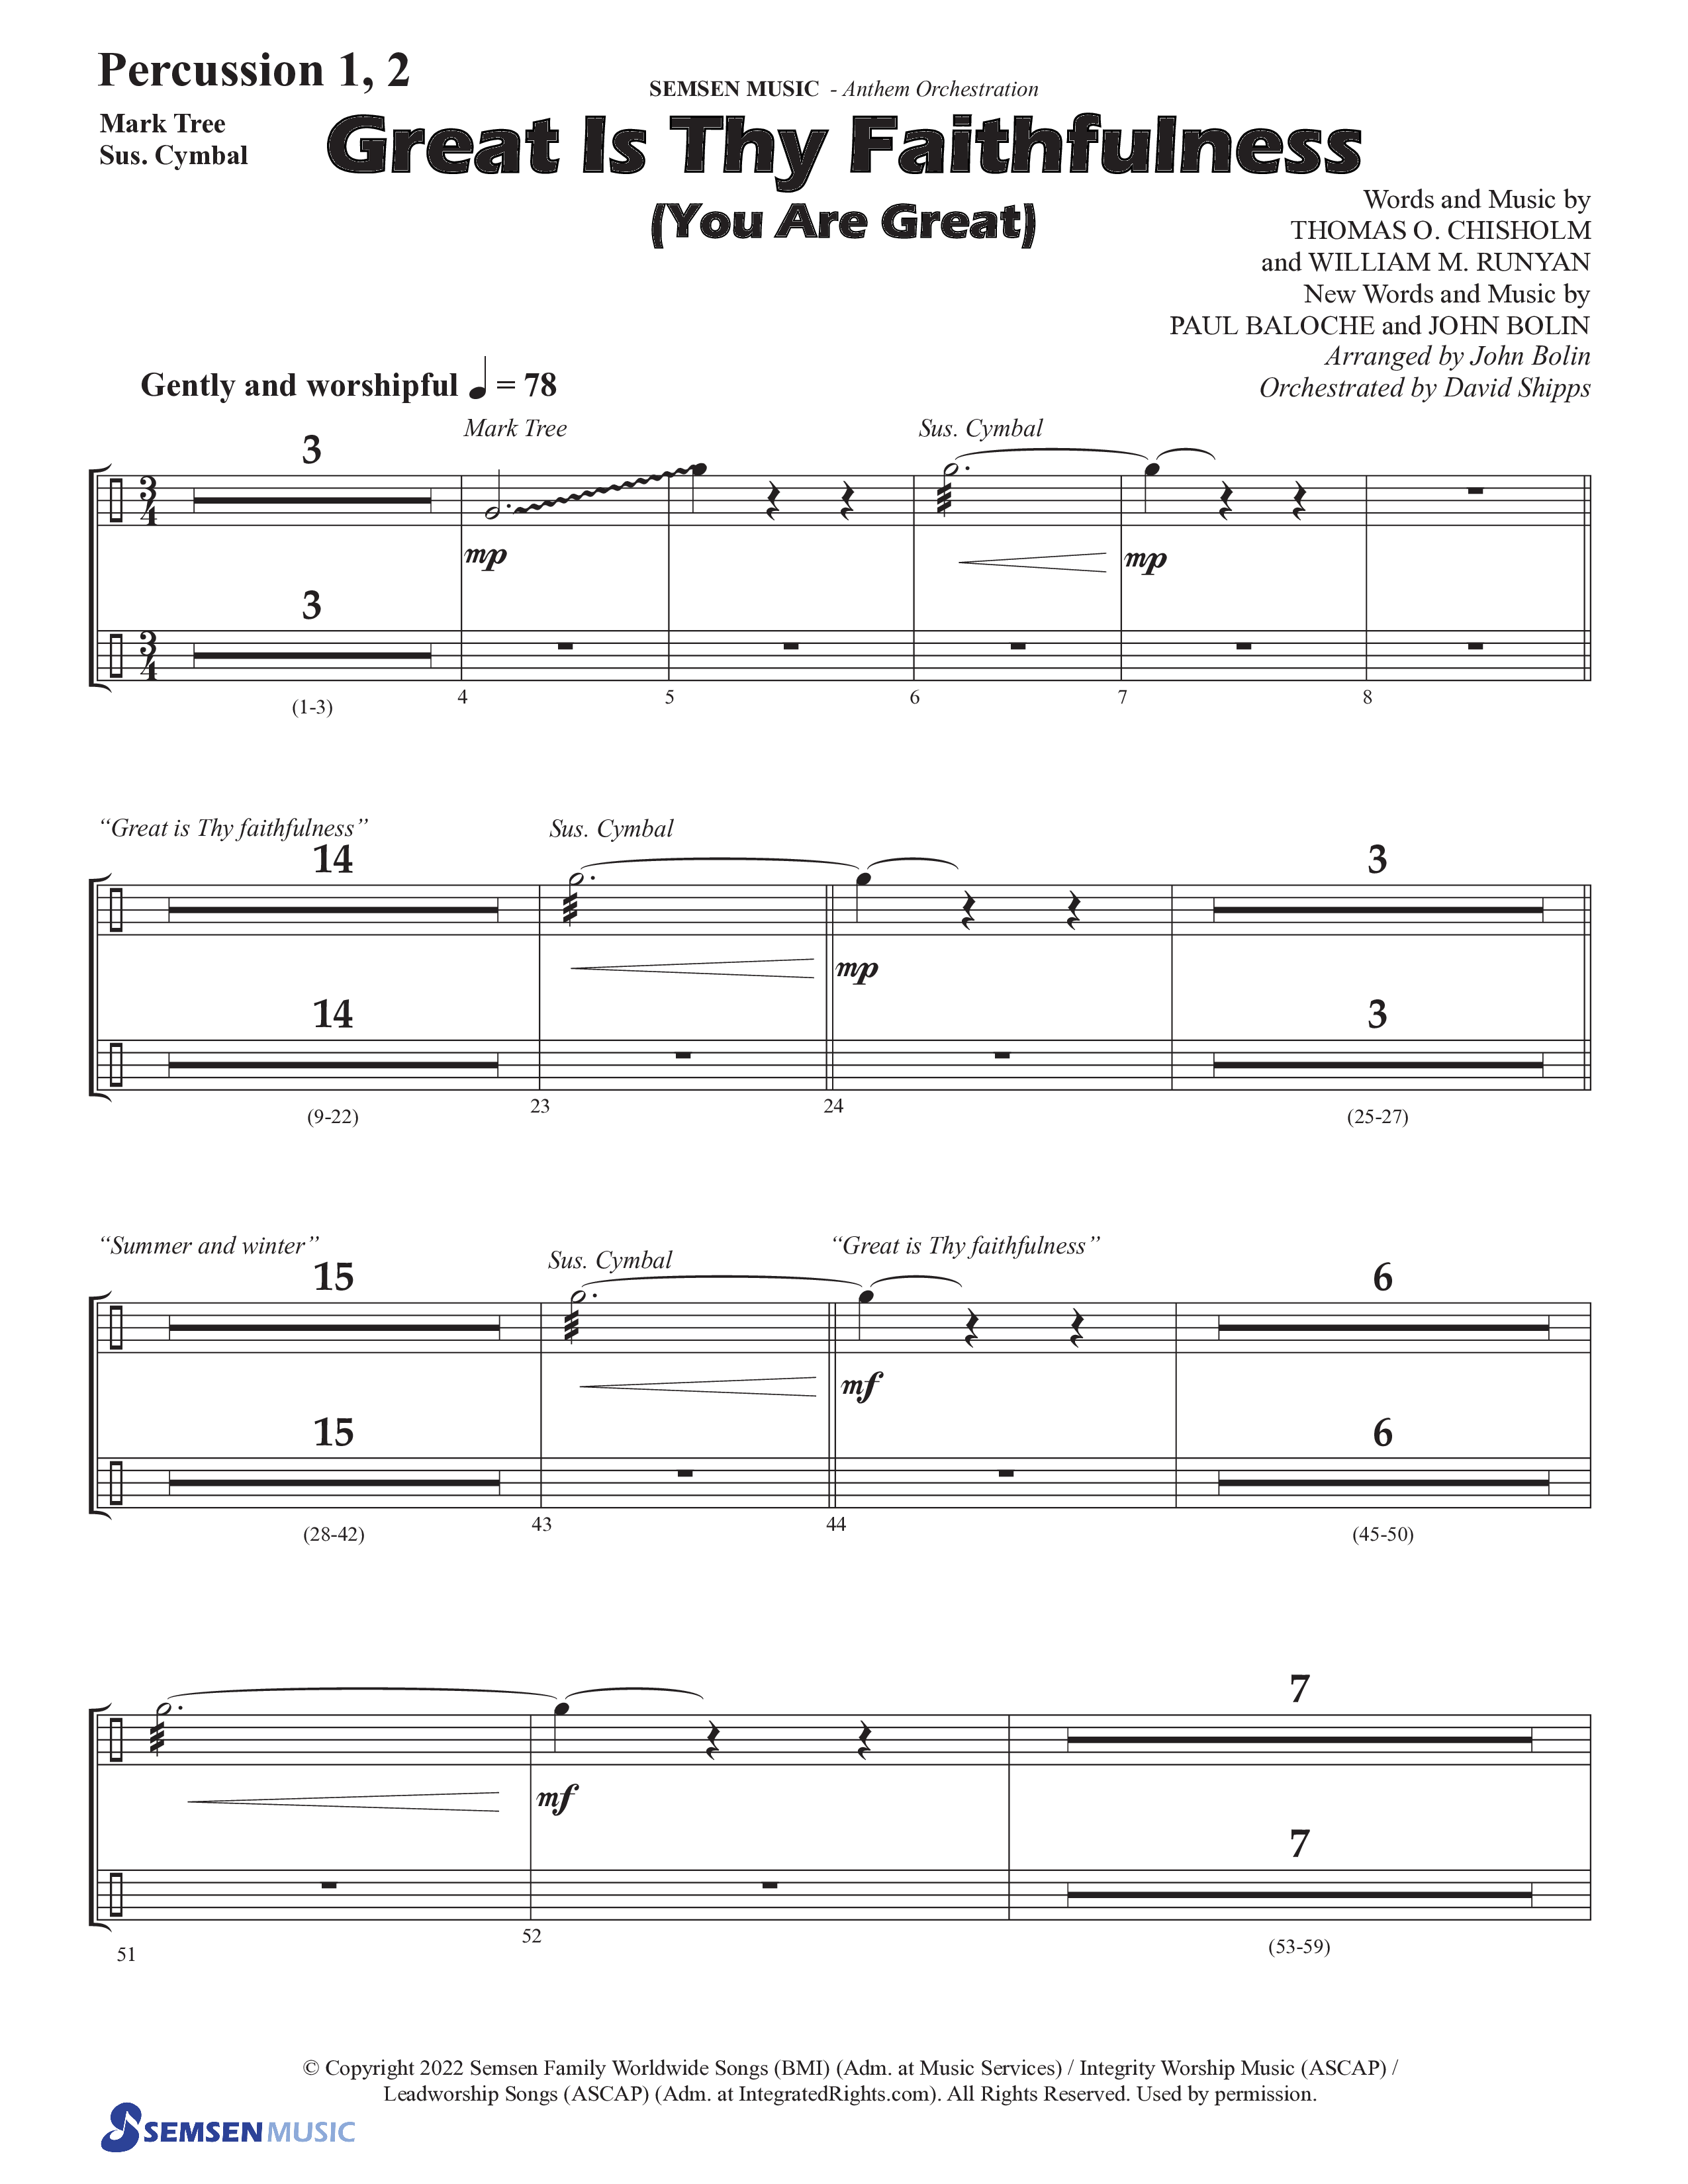 Great Is Thy Faithfulness (You Are Great) (Choral Anthem SATB) Percussion 1/2 (Semsen Music / Arr. John Bolin / Orch. David Shipps)